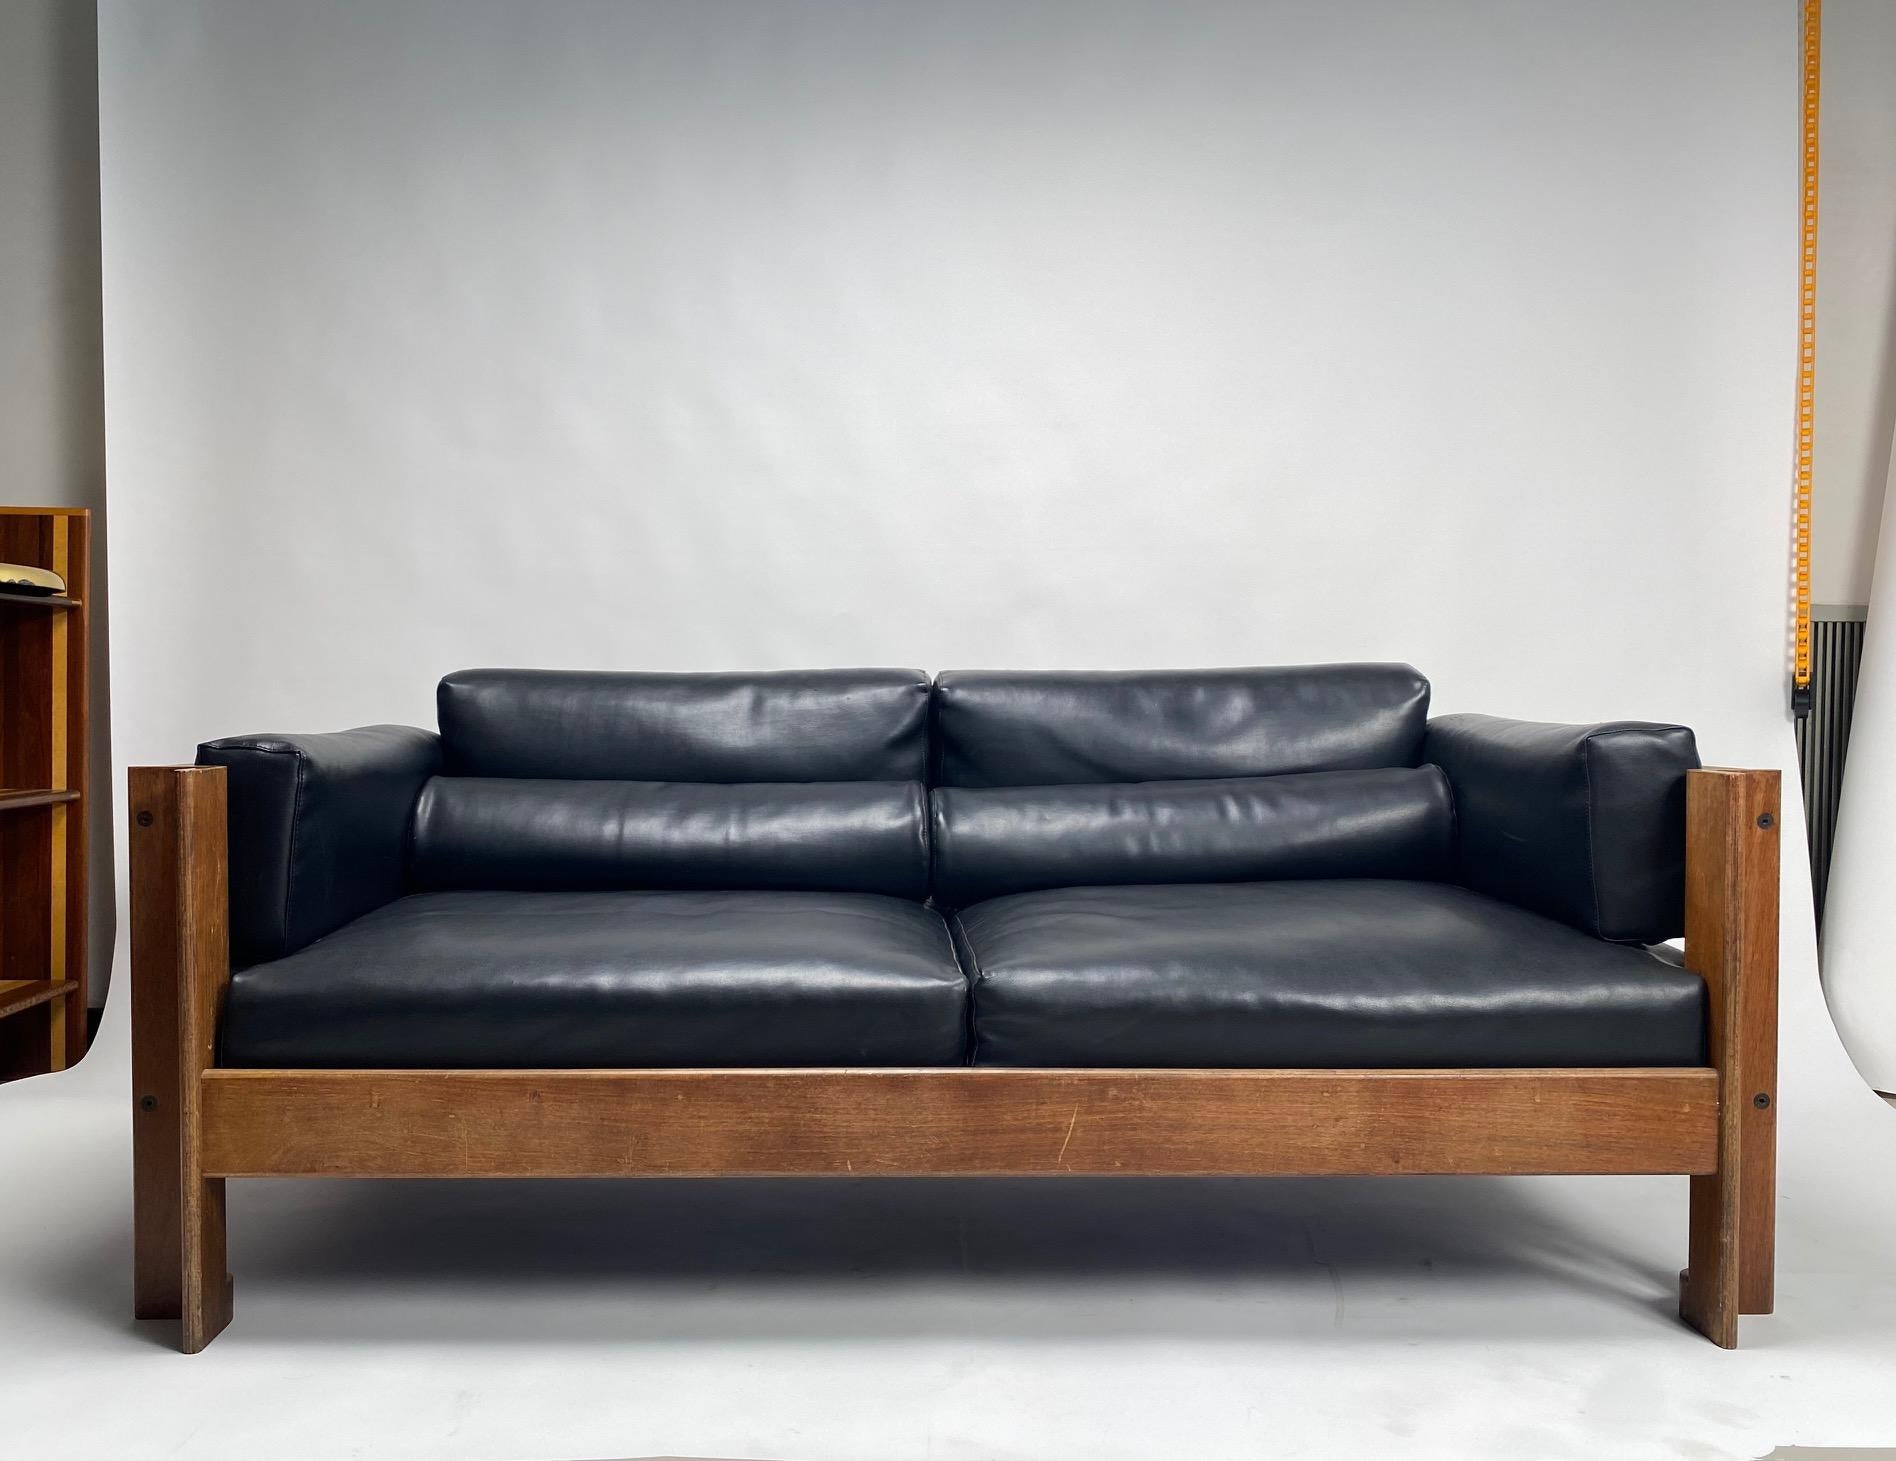 Sergio Asti, 'Zelda' model sofa for Saporiti, Italy.

The two-seater sofa, compact and elegant, has a refined wooden structure of great geometric rigor. It adapts perfectly to both a living and working context, finding its place even in small